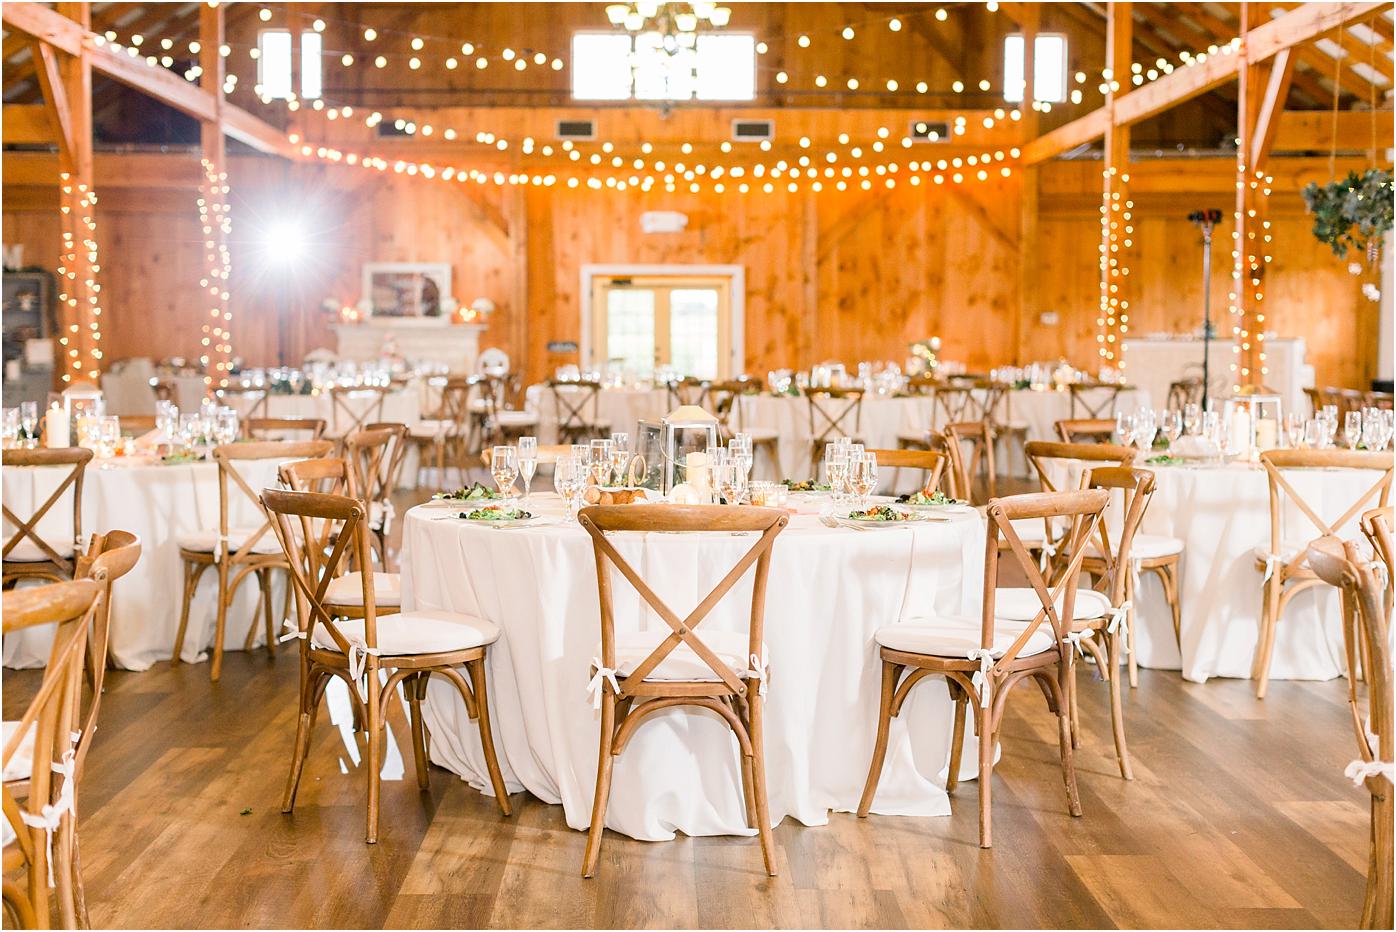 Shadow Creek's barn reception details with white table clothes, lantern center pieces and string lights